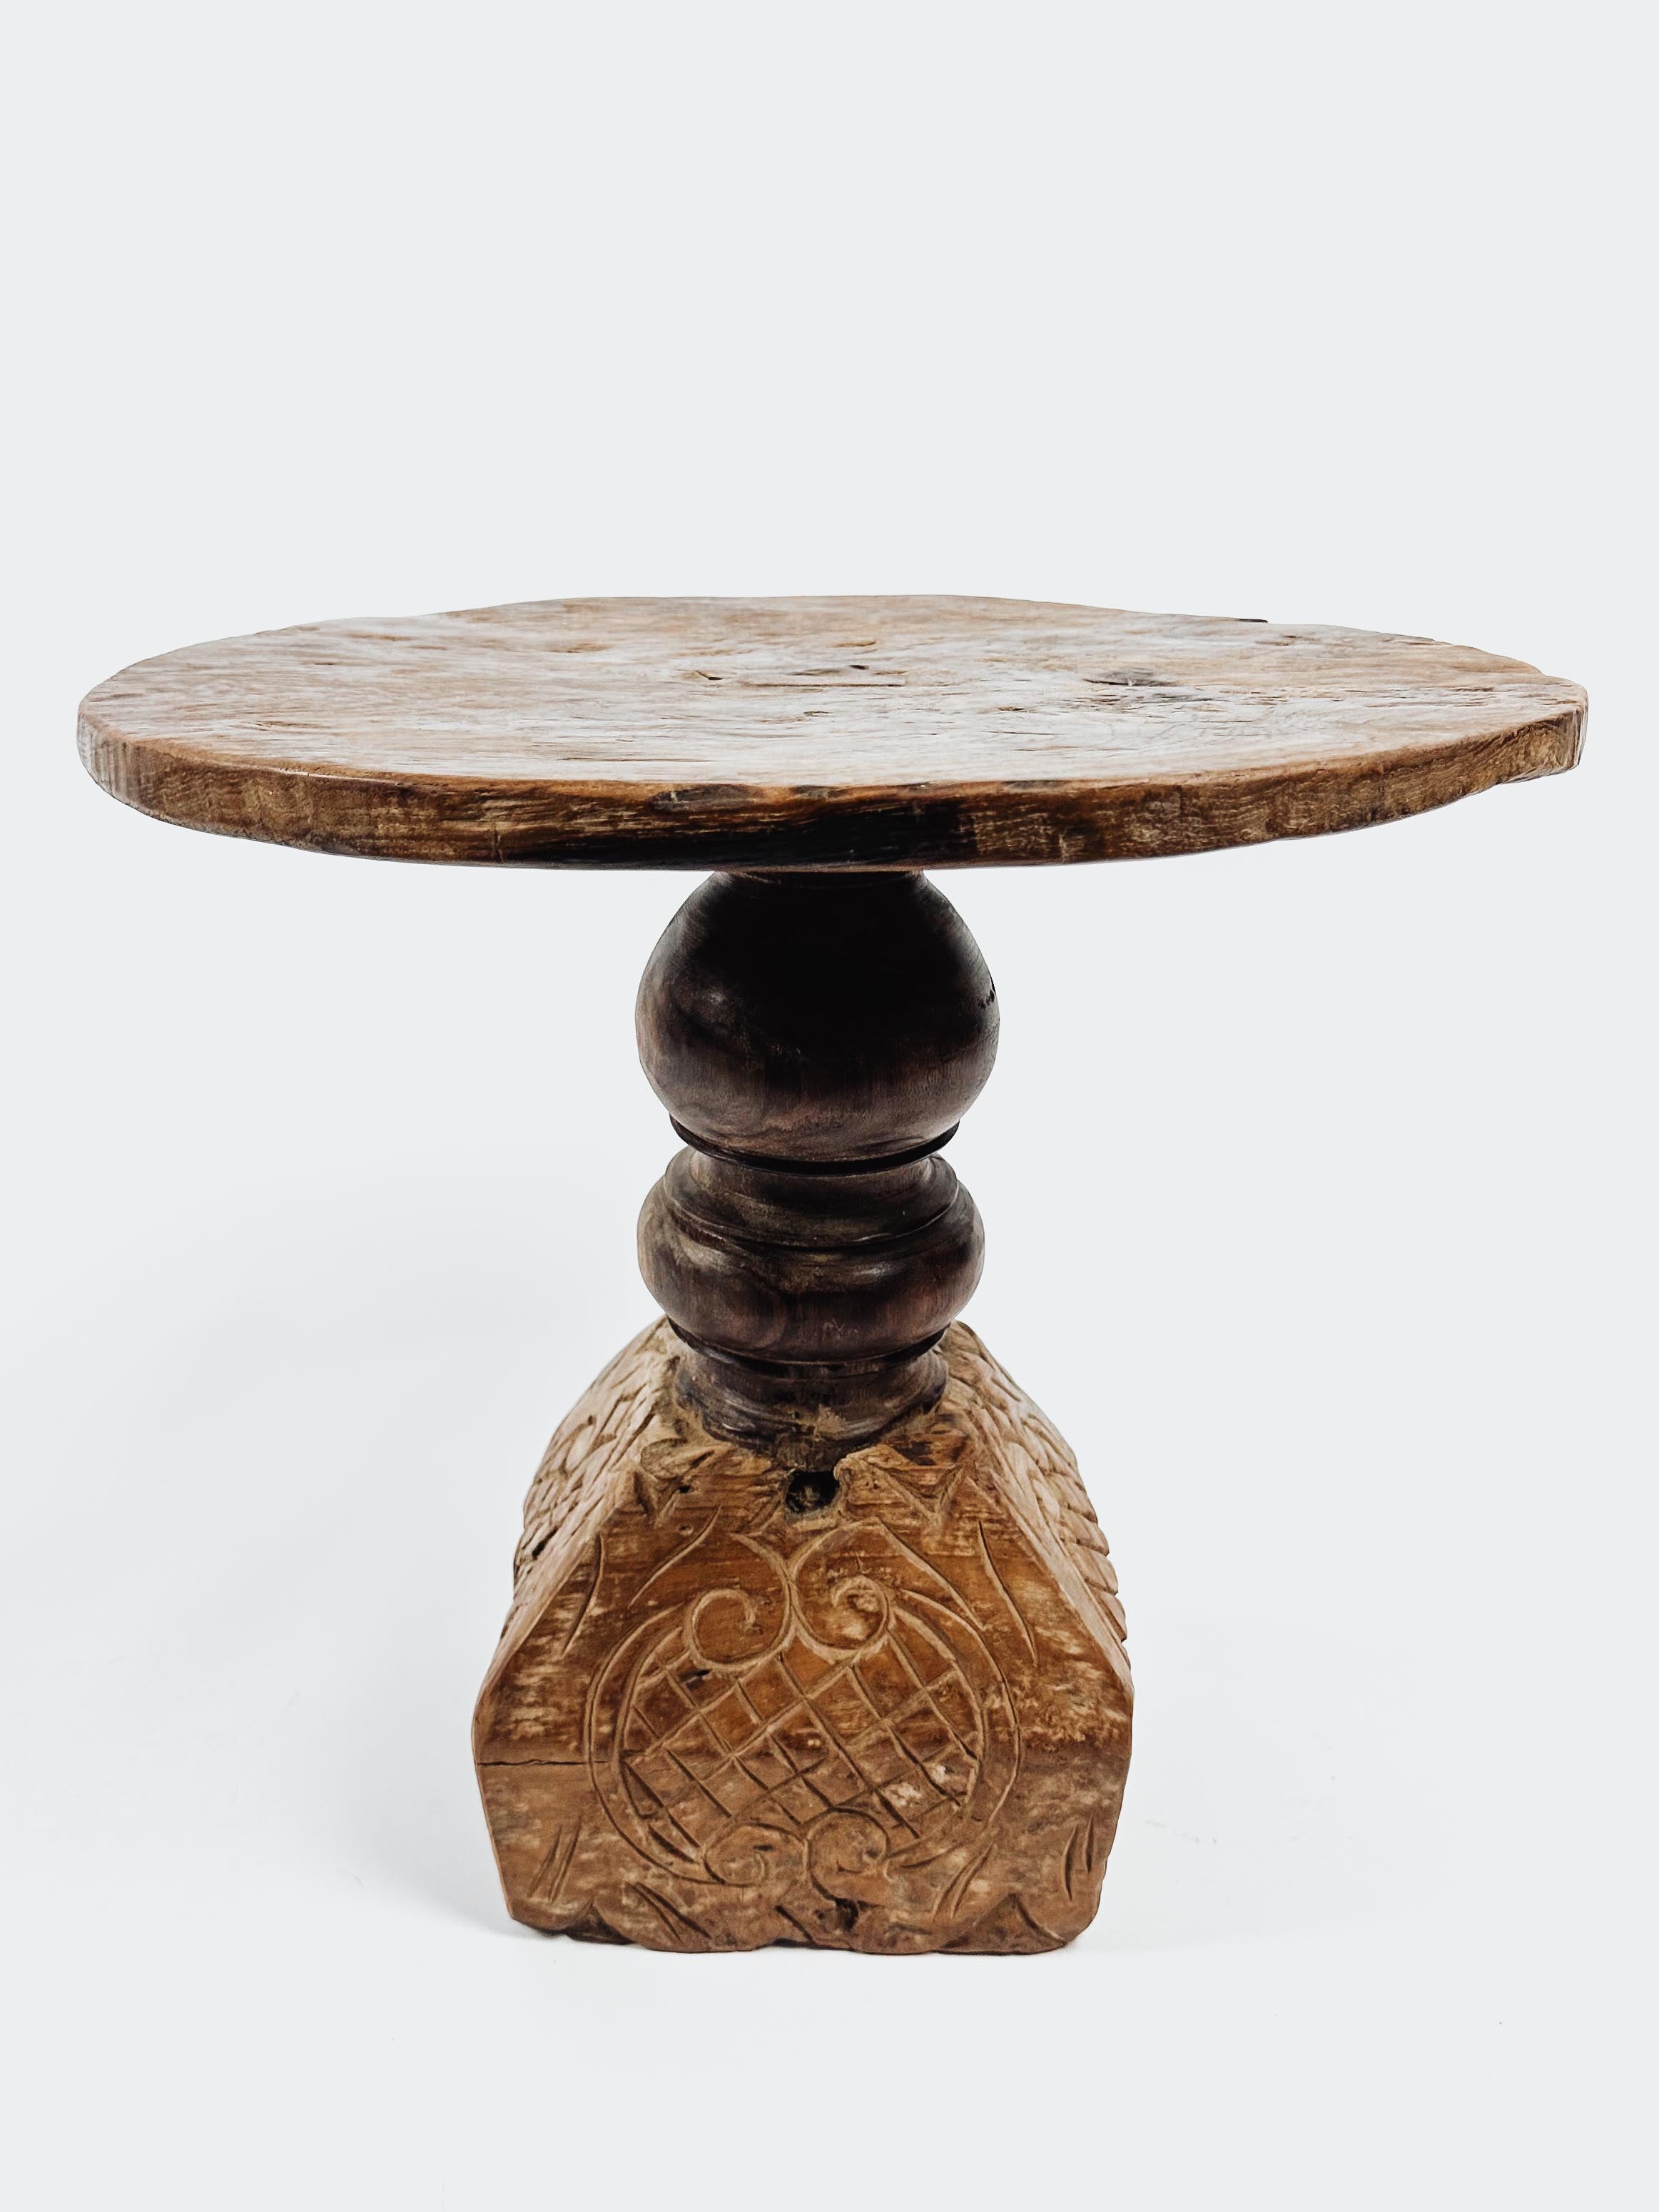 The teak side round table